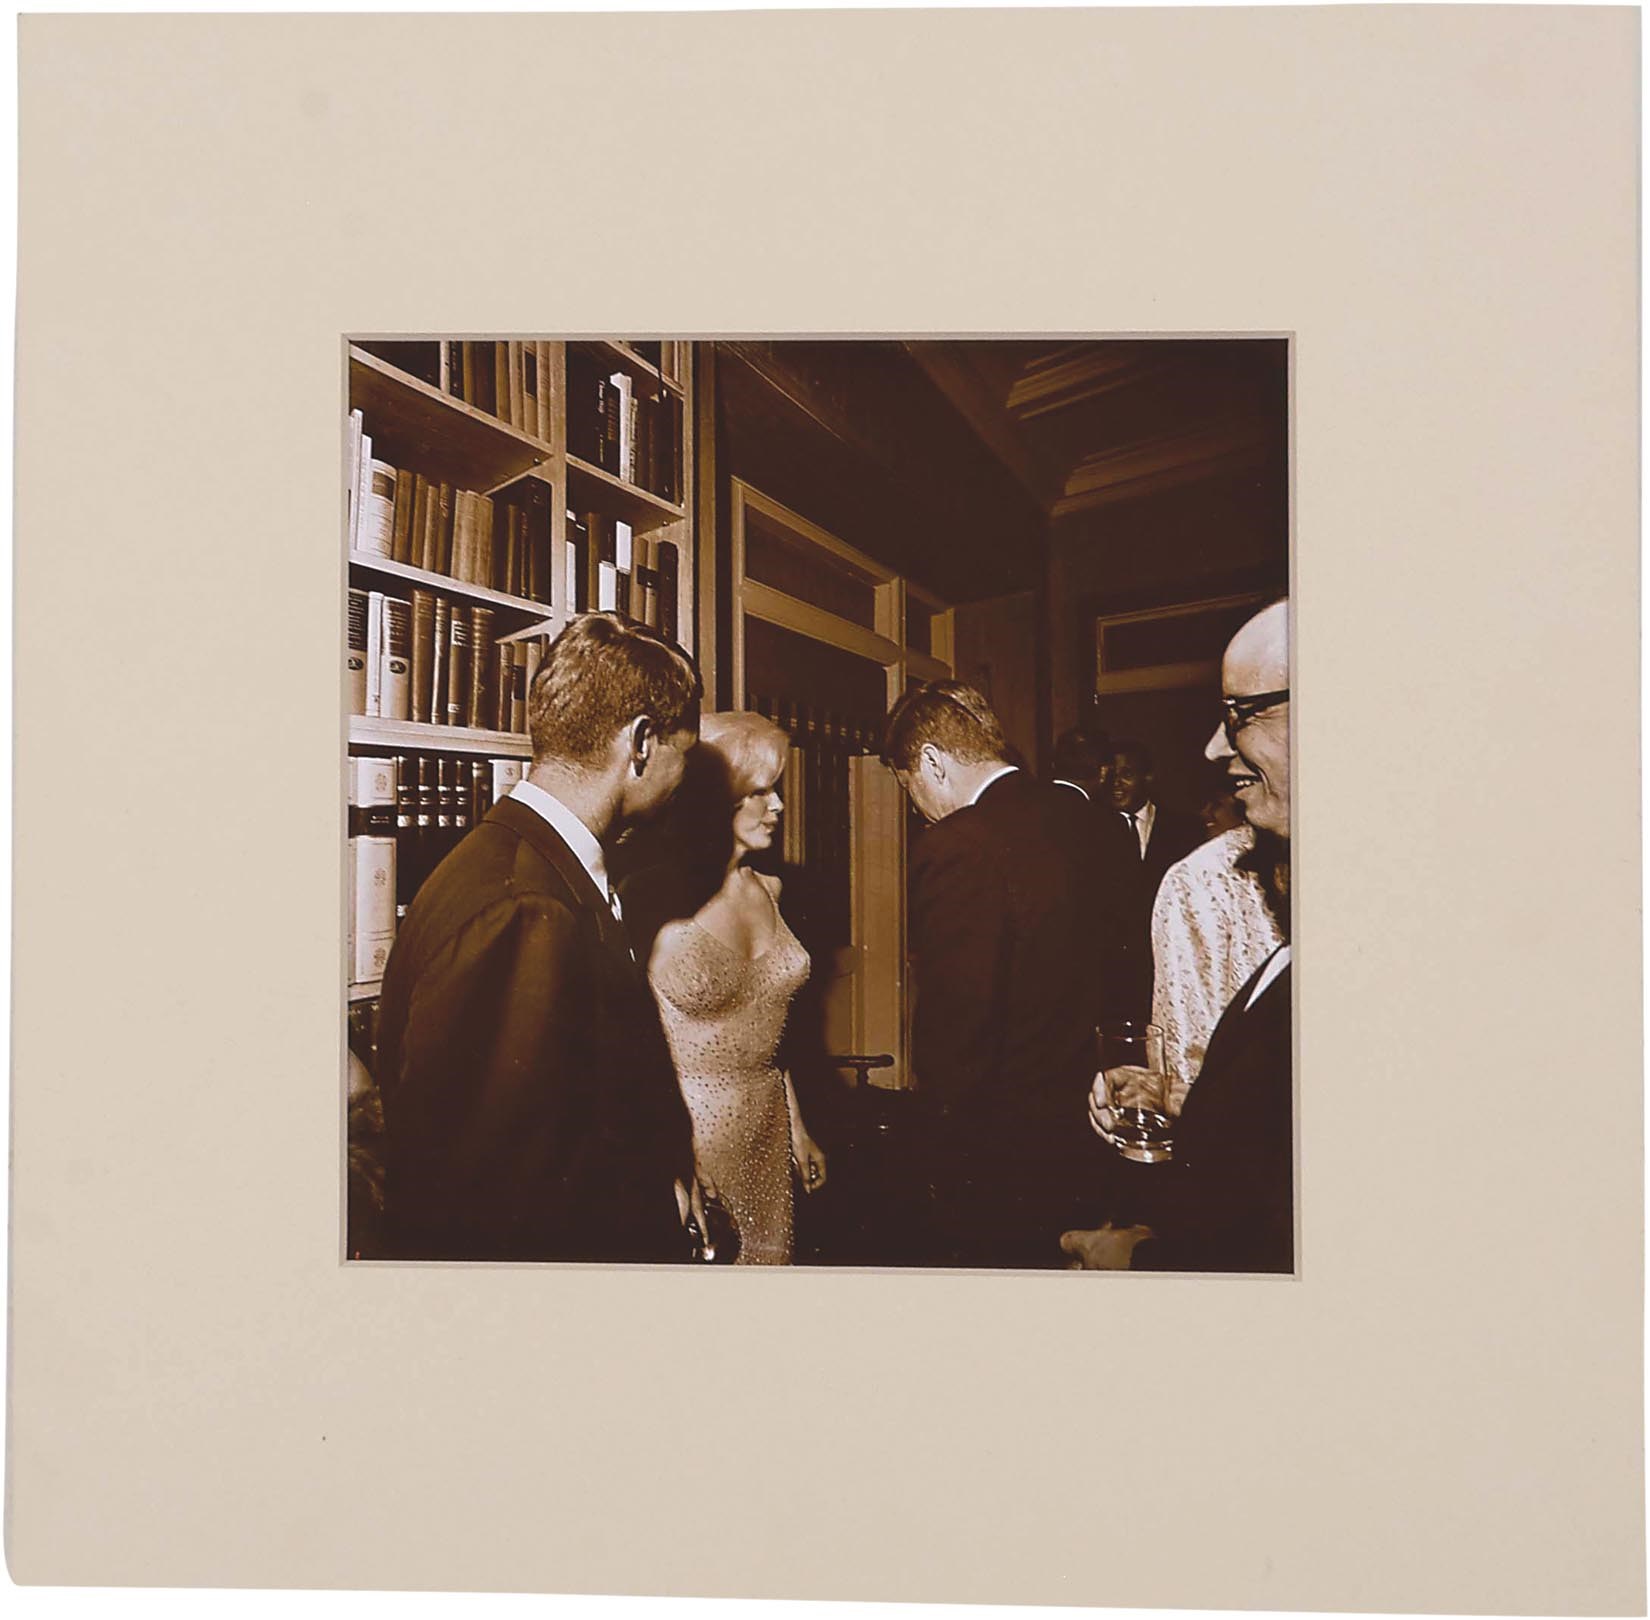 Best of the Best - Only Known Photograph of JFK & Marilyn - from Official JFK White House Photographer Cecil W. Stoughton